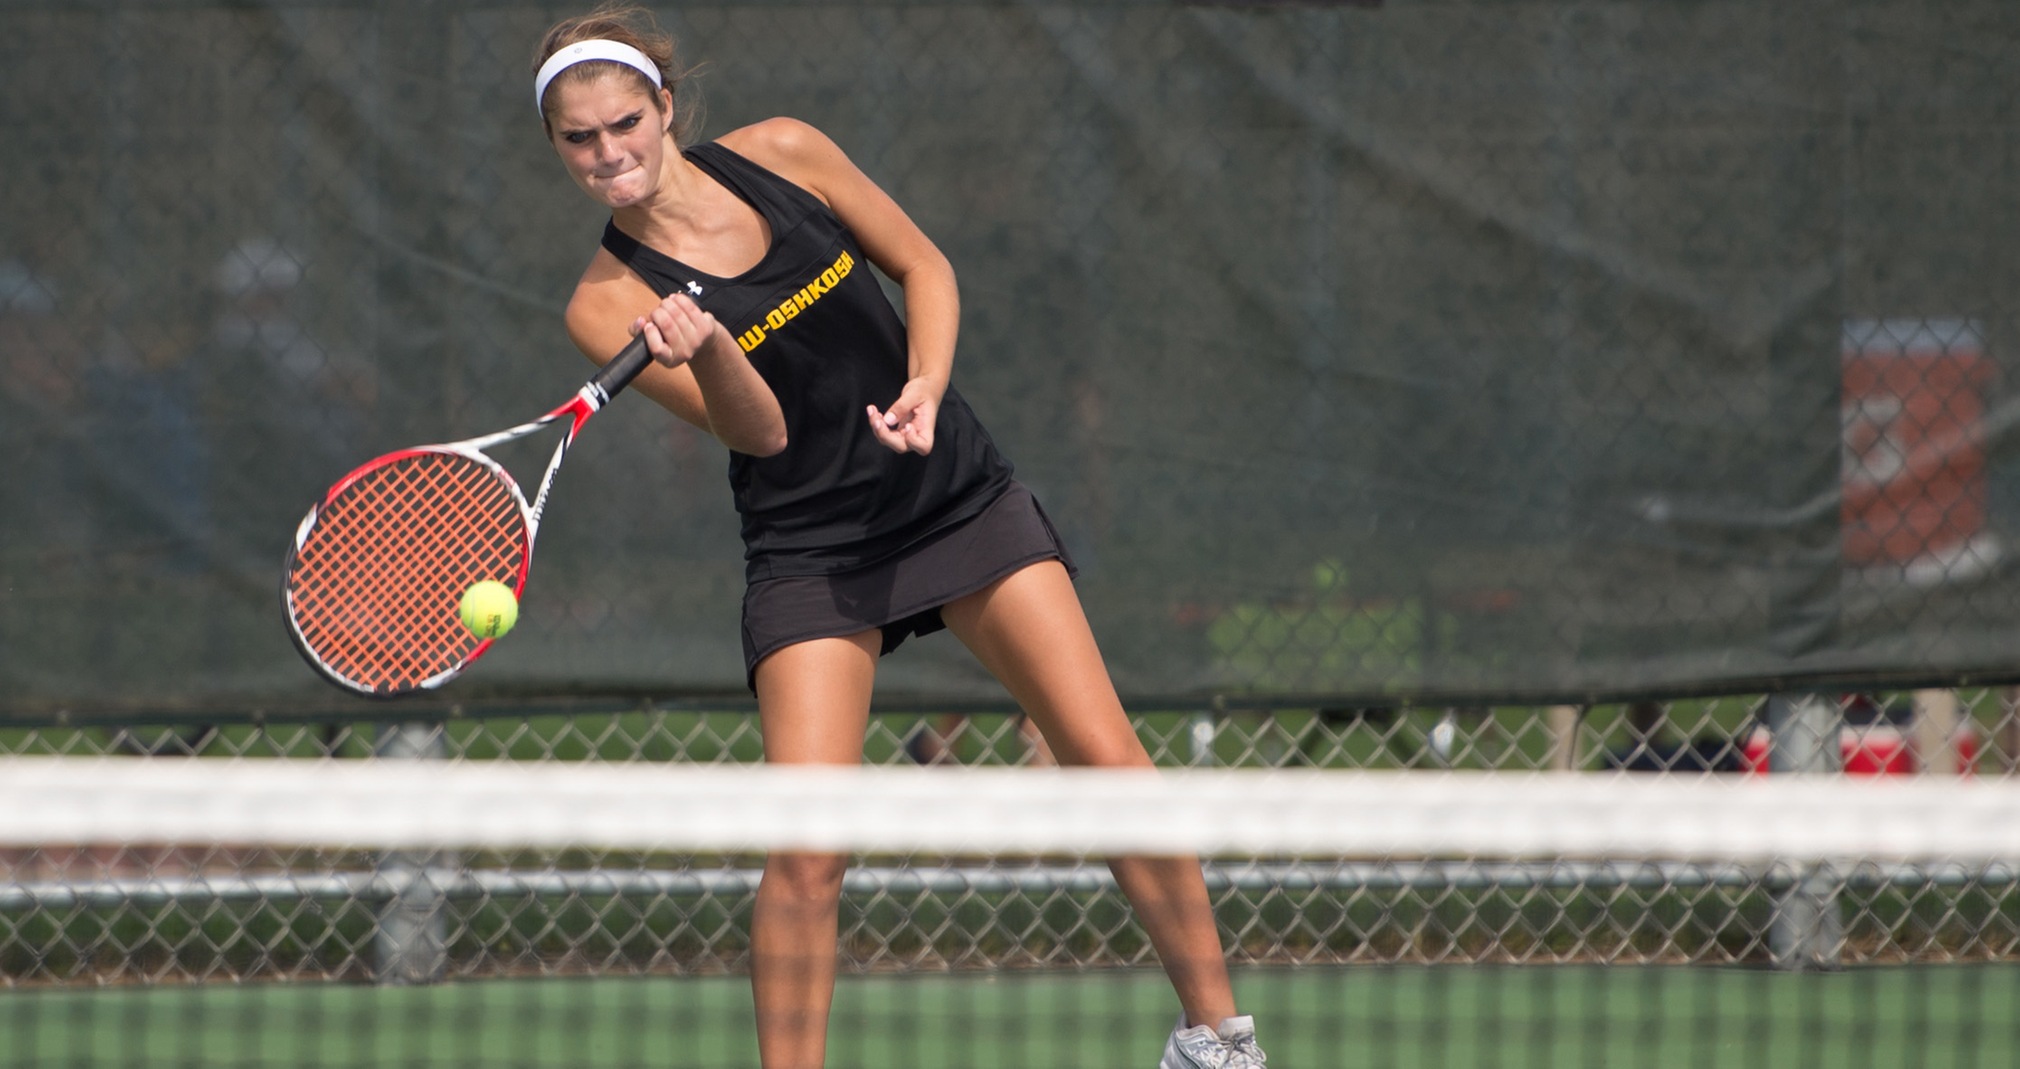 Alyssa Leffler was a winner at No. 2 singles against The College of Wooster.